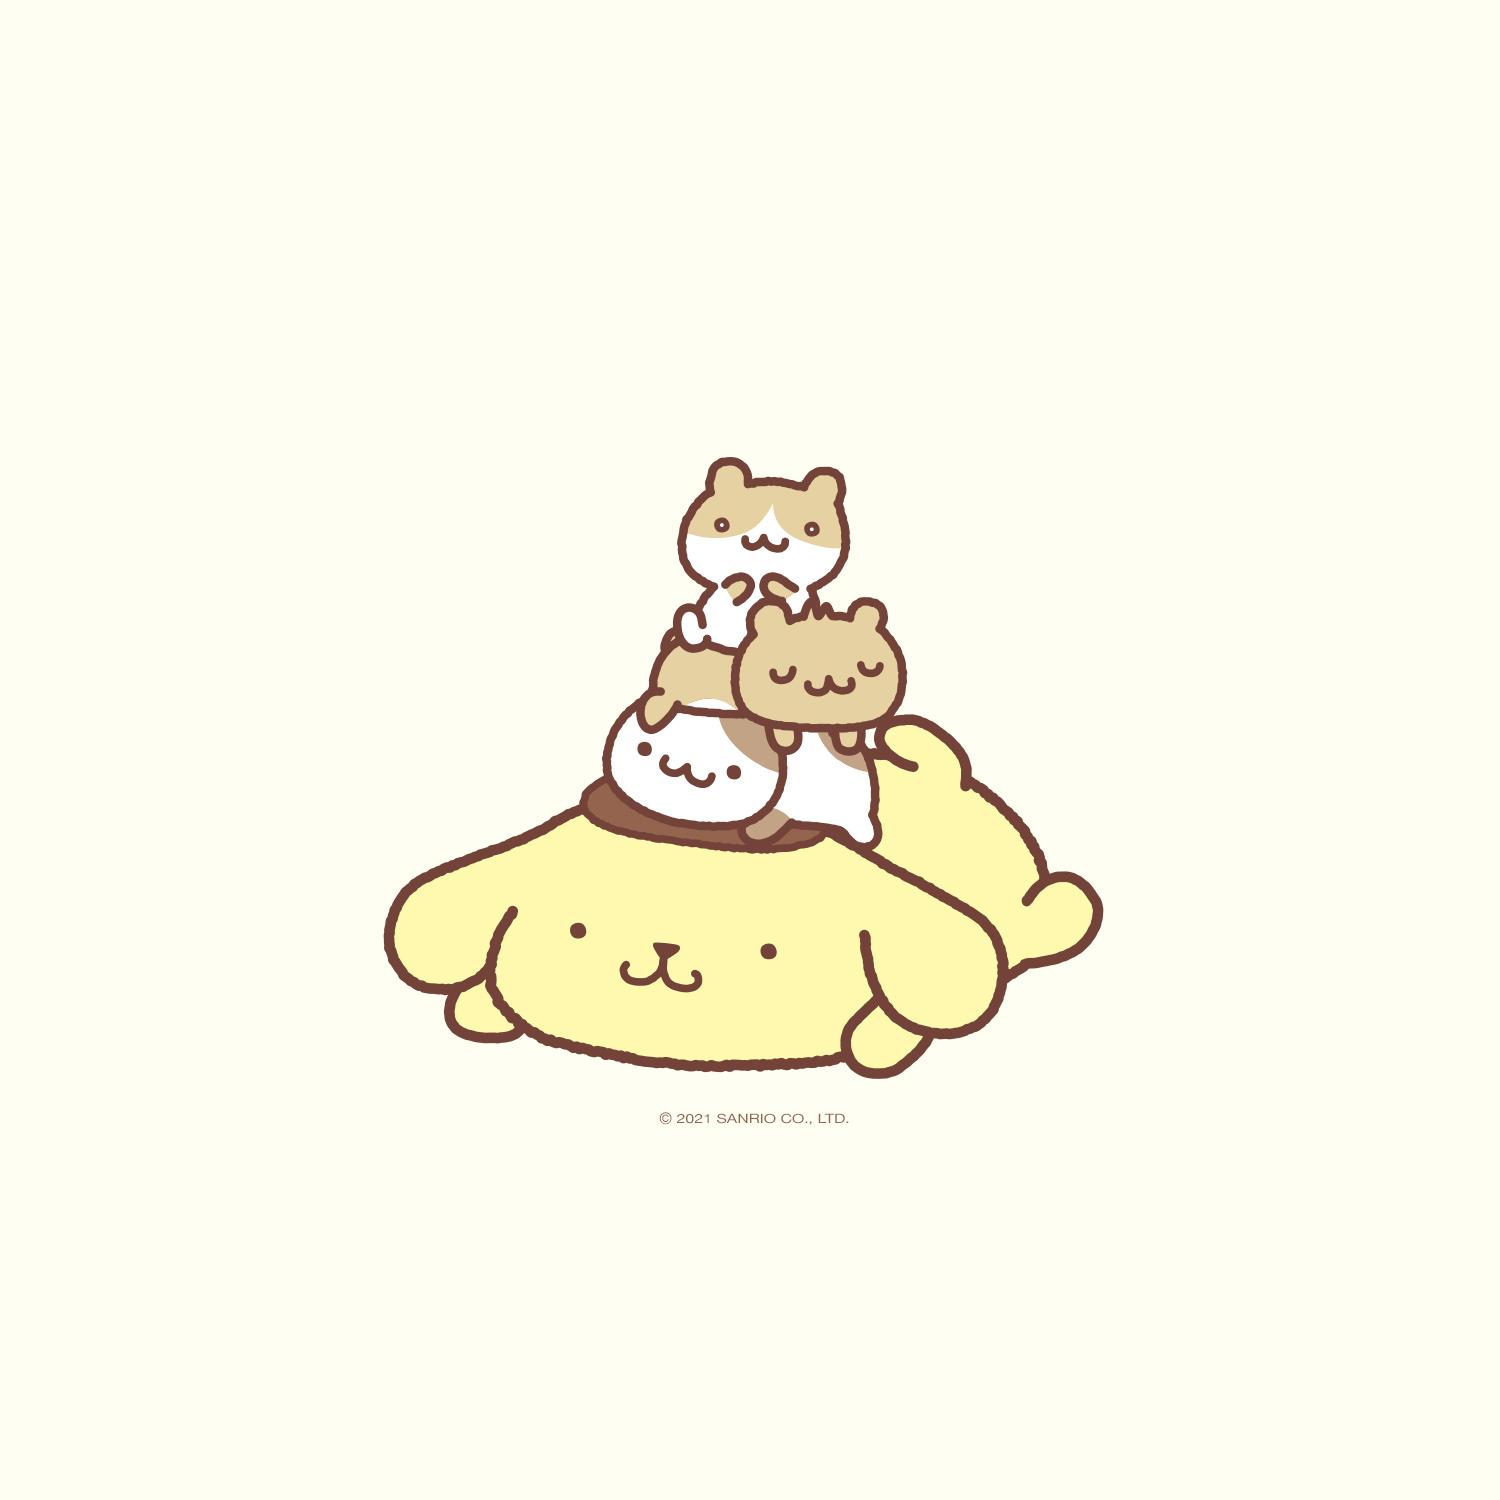 Sanrio #Pompompurin on the go with new background for your phone!